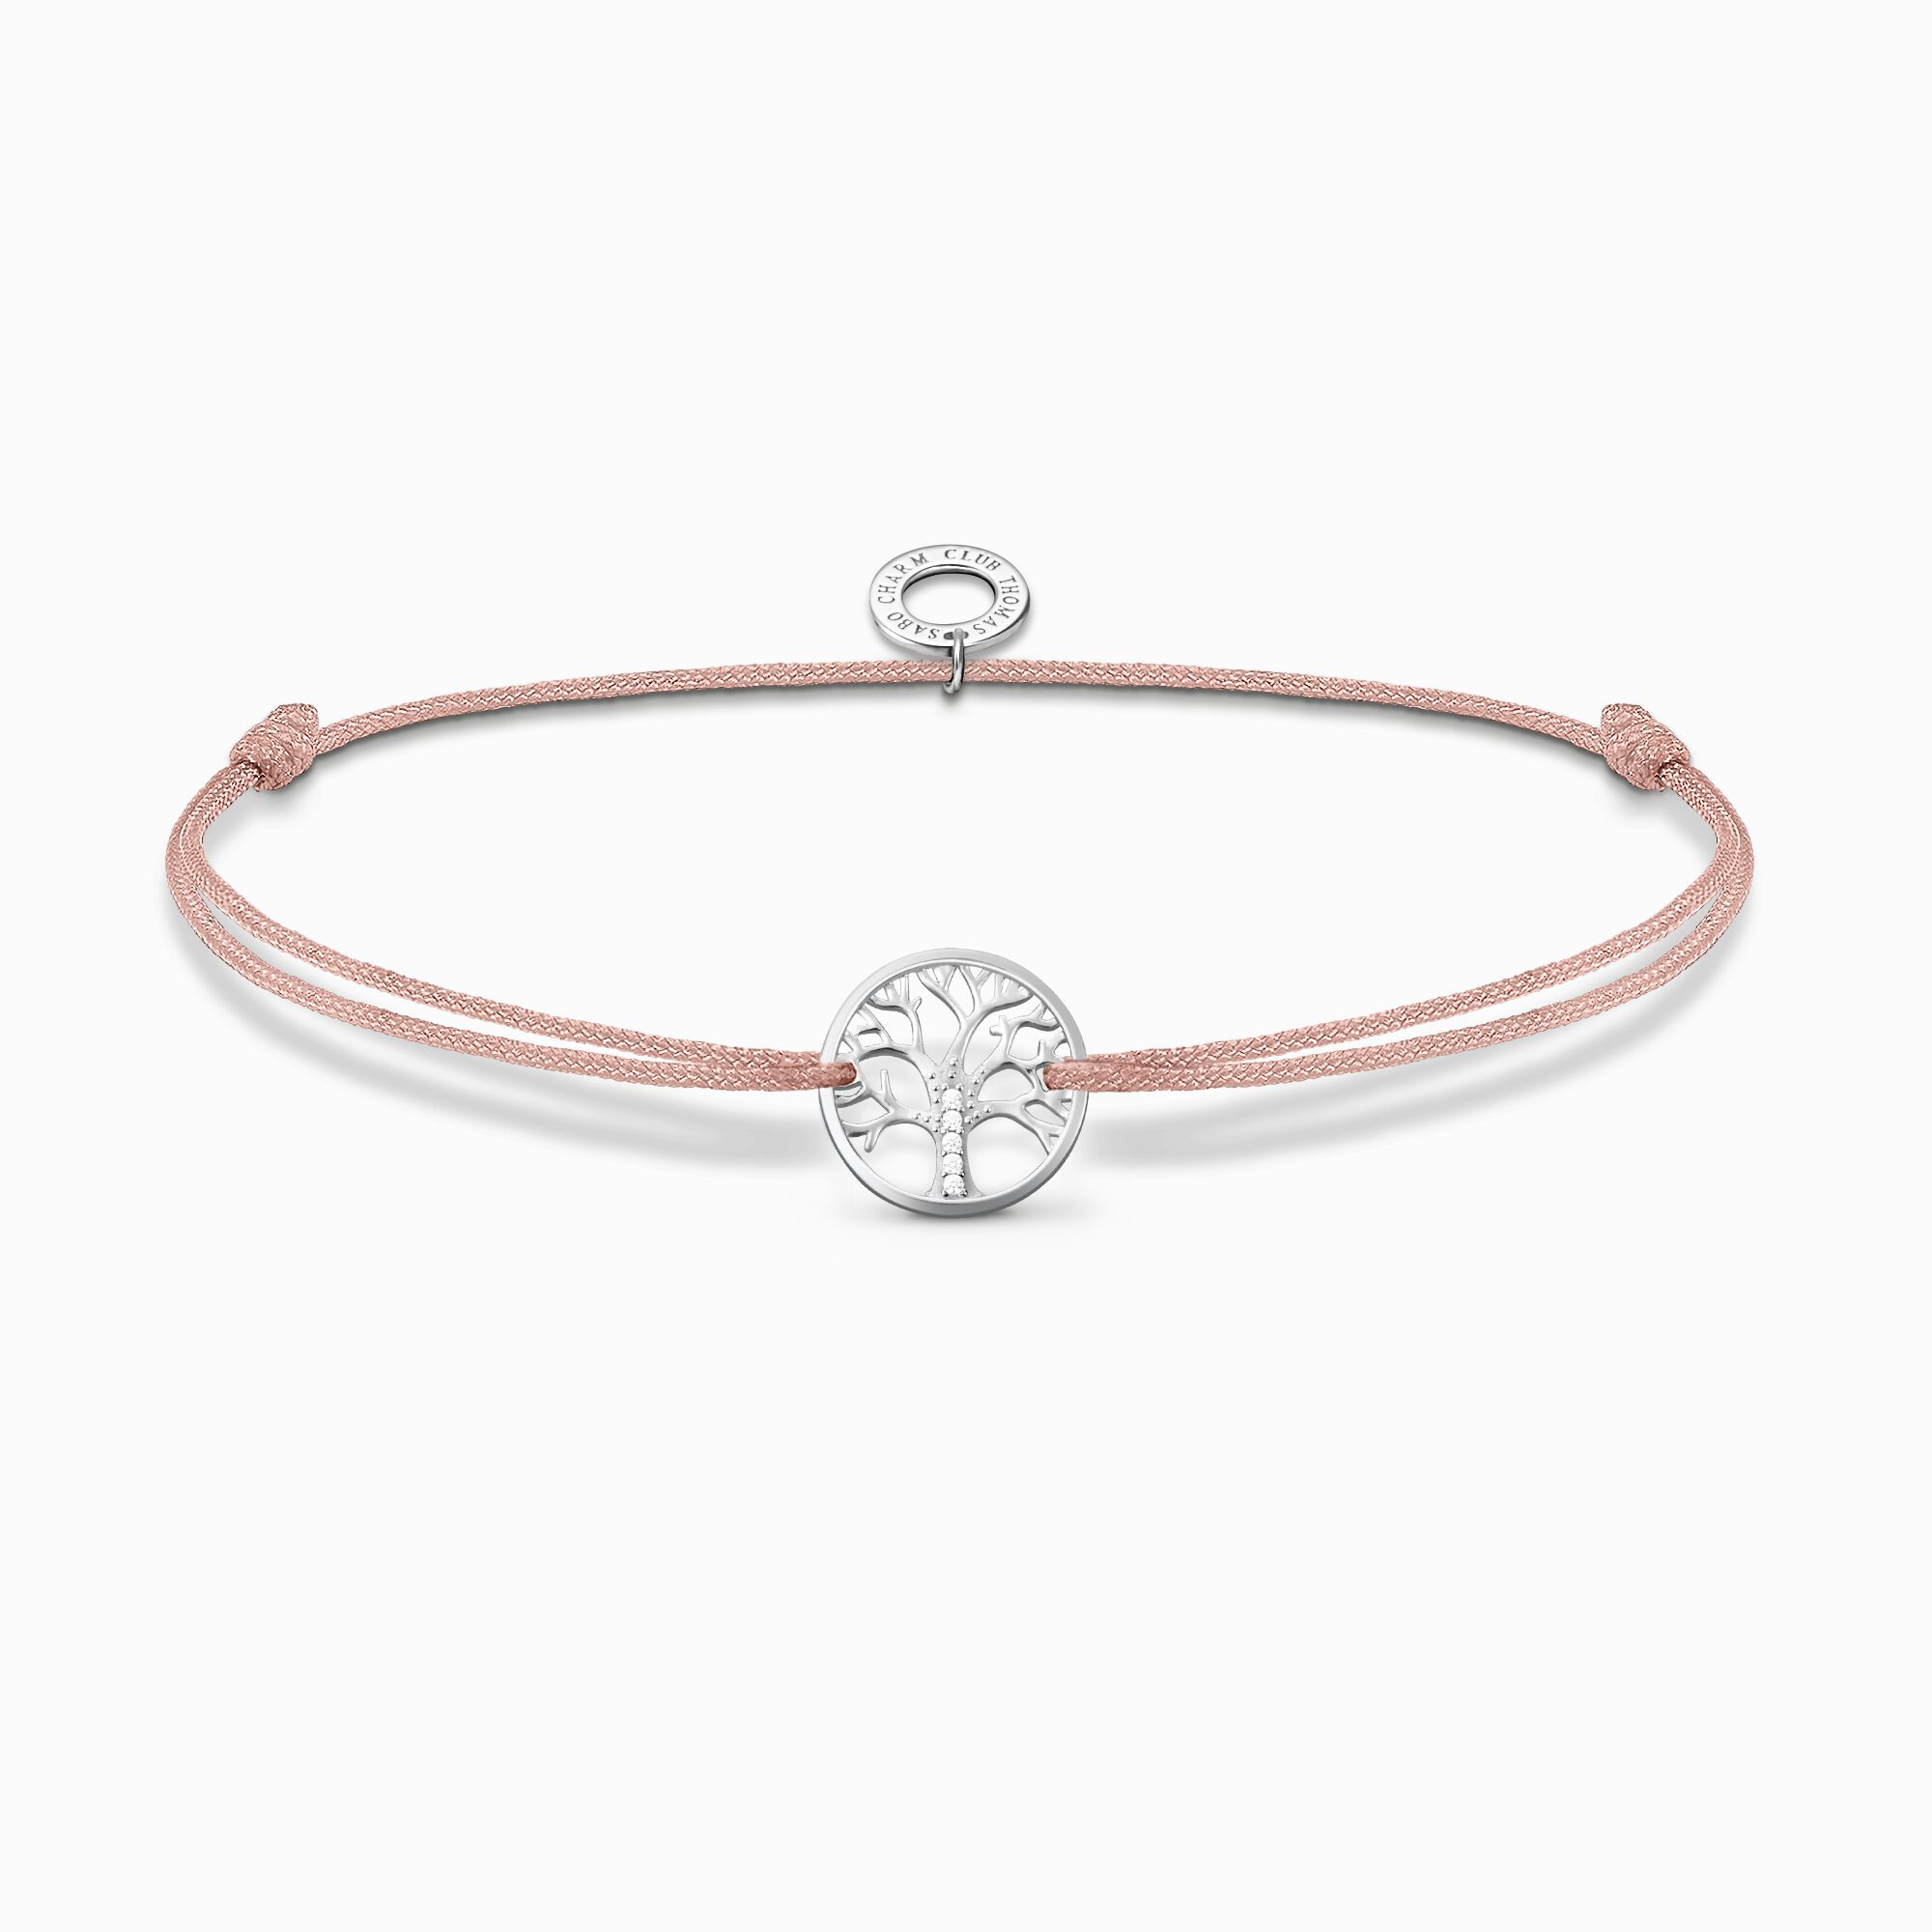 Bracelet Little Secret Tree of Love from the Charming Collection collection in the THOMAS SABO online store